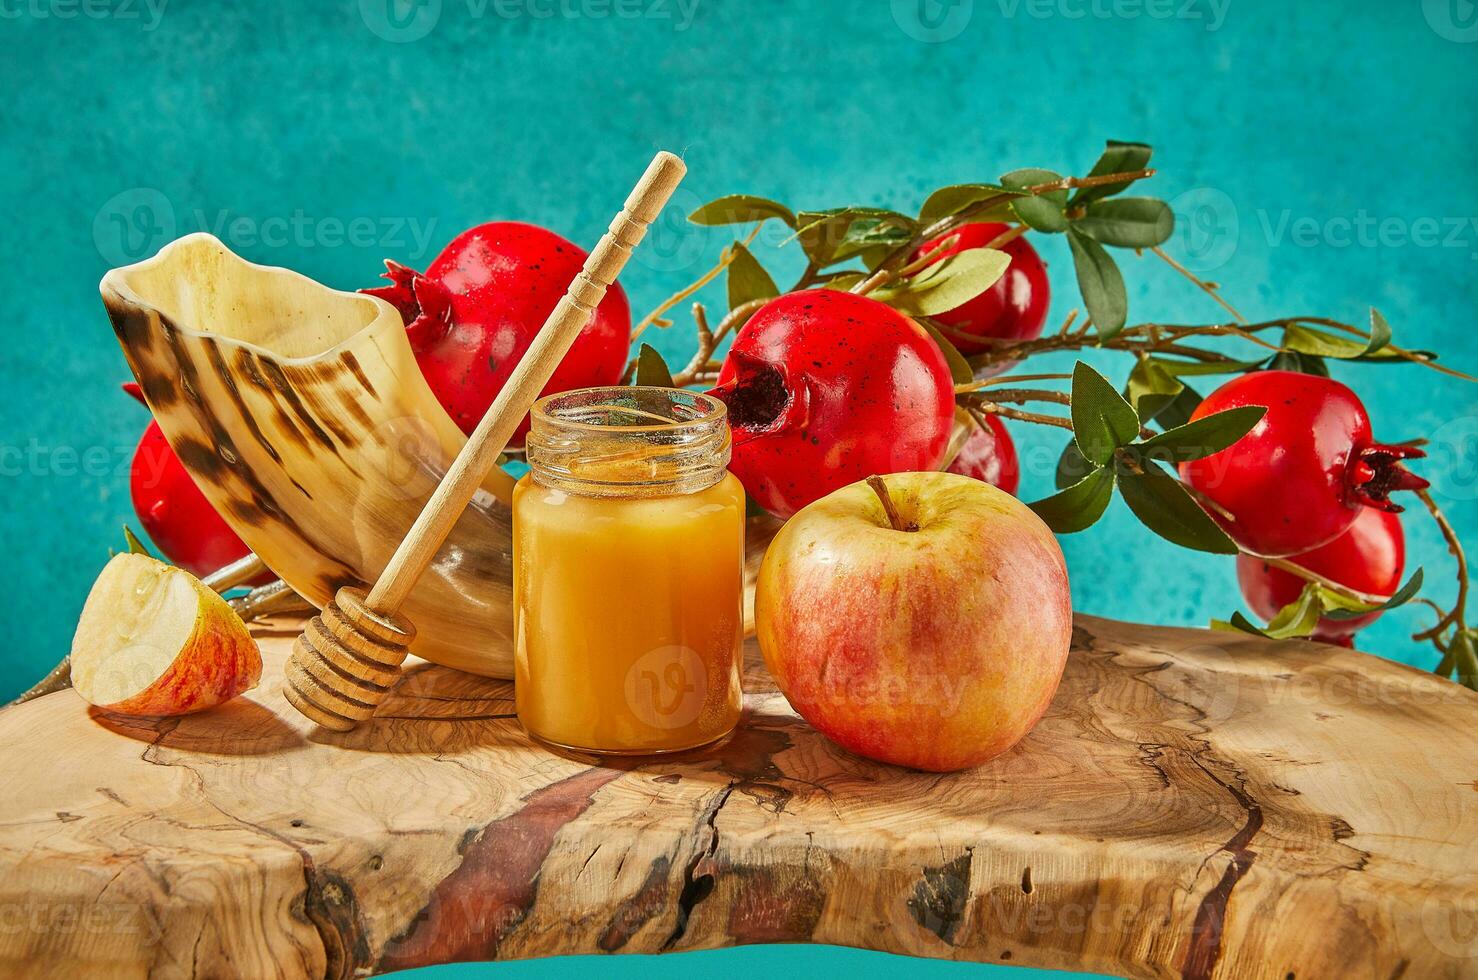 Rosh hashanah - jewish new year holiday concept. Bowl in the shape of an apple with honey, apples, pomegranates, shofar on a blue background. photo